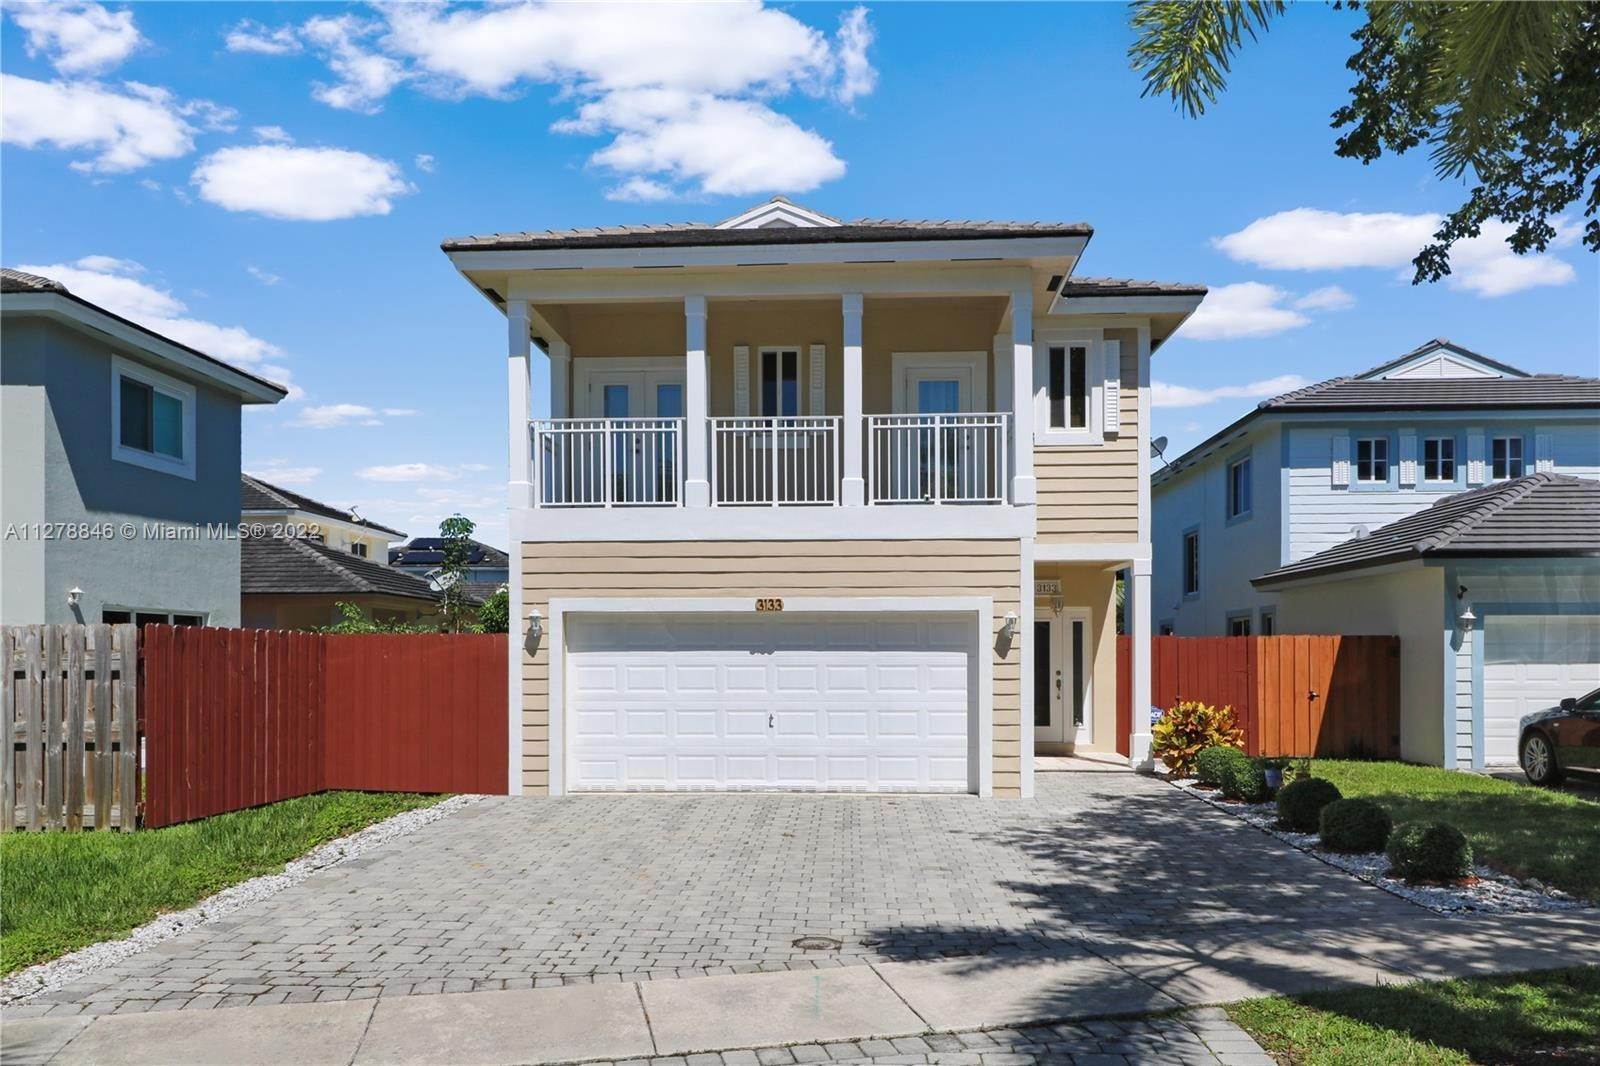 Single Family for Sale at Homestead, FL 33033